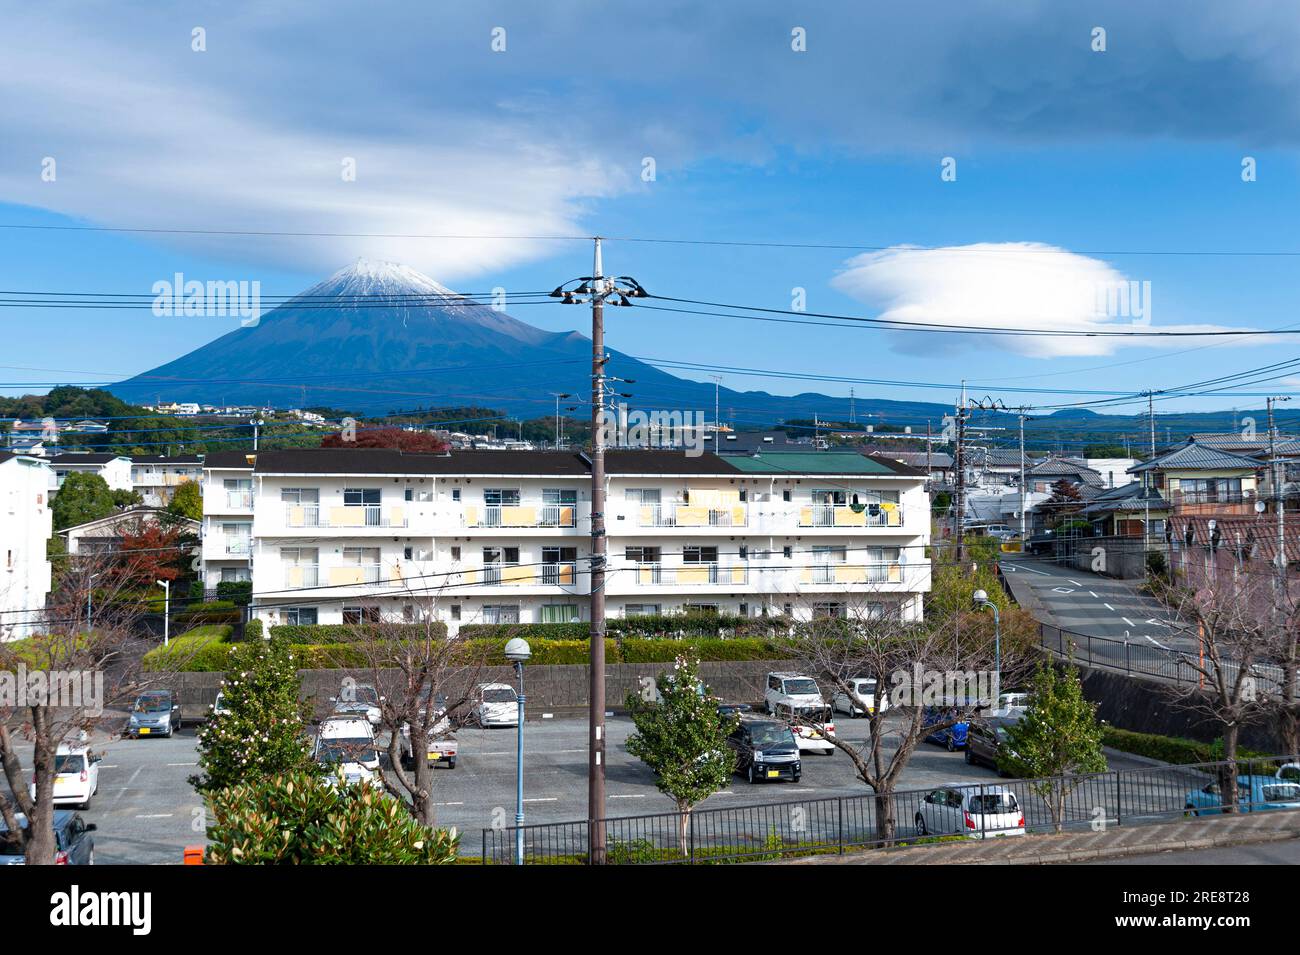 Fuji City, Shizuoka Prefecture, Japan - November 14, 2021: Beautiful city scene of Mount Fuji with housing estate, cars and houses with clouds and blu Stock Photo